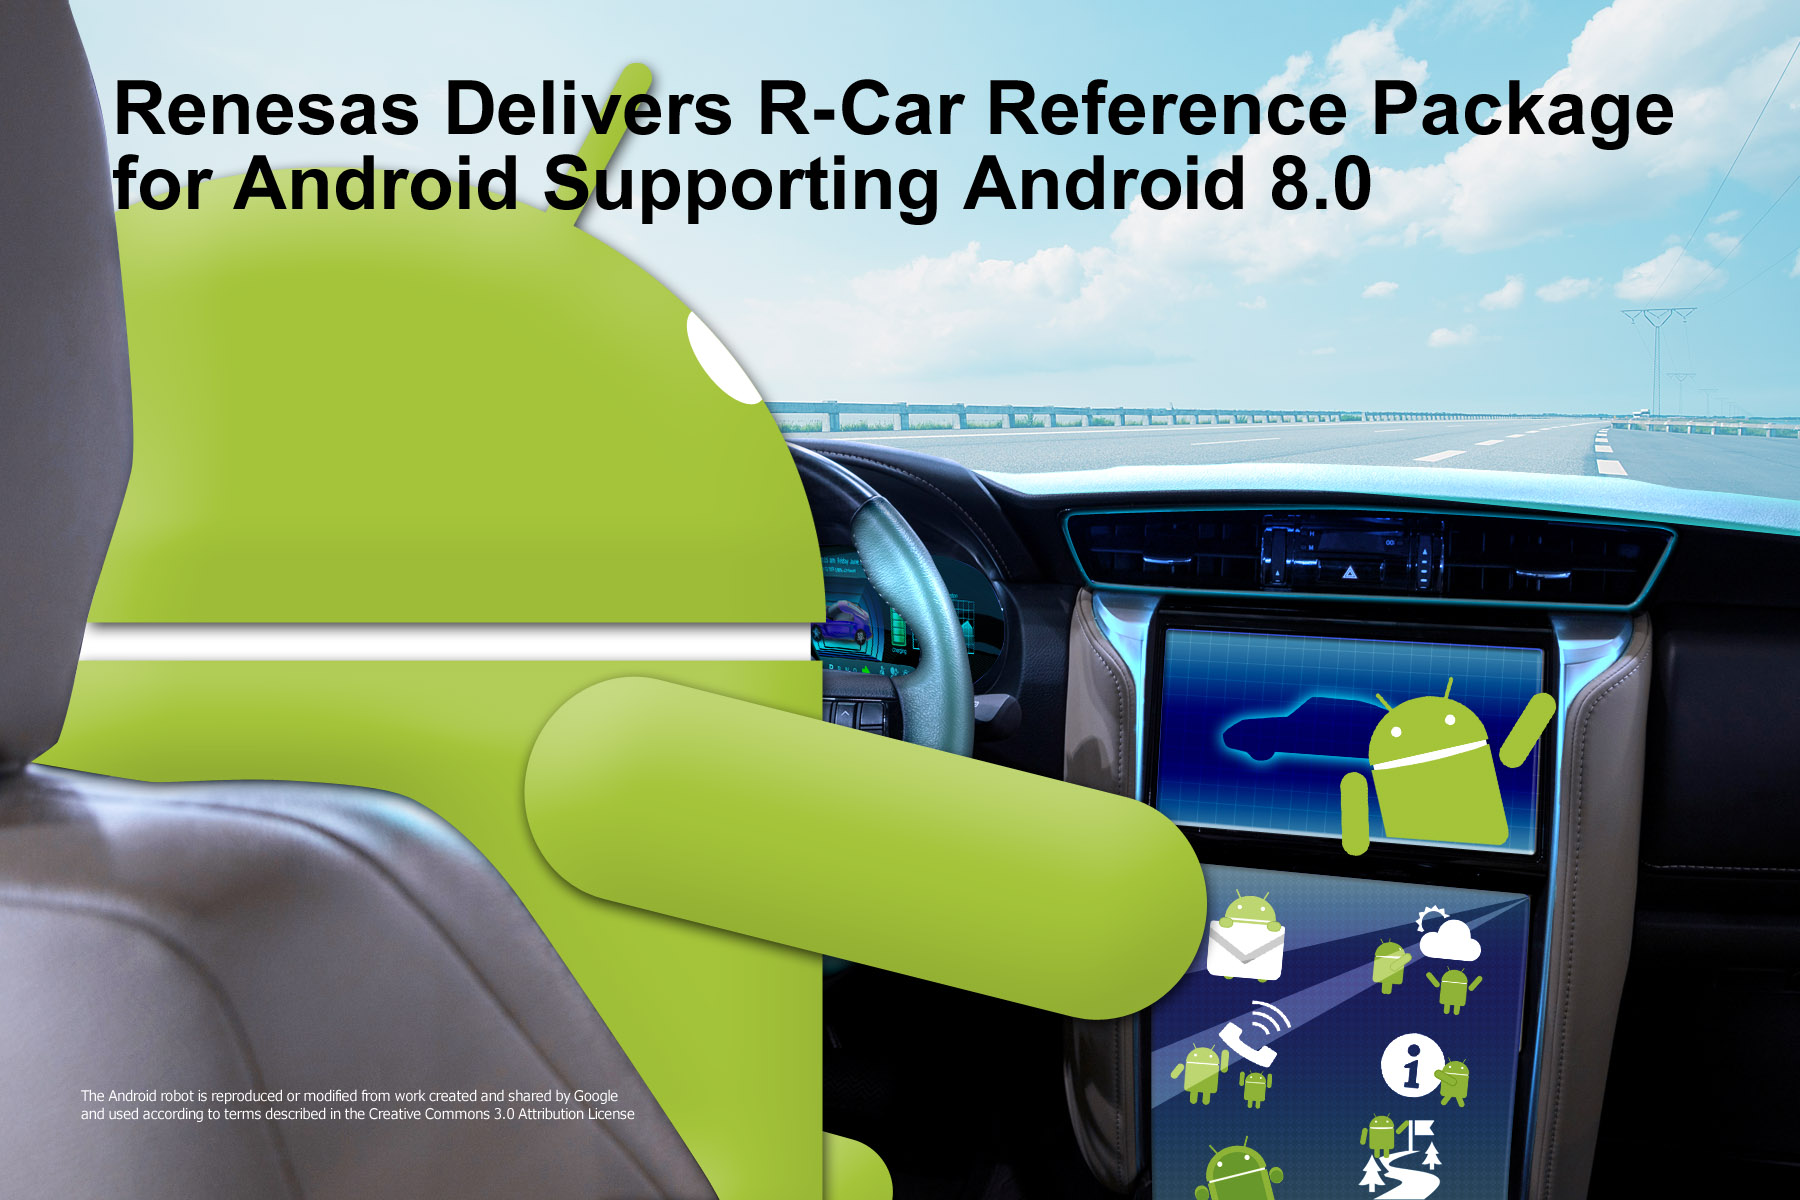 Apk support. Android Advanced Driving assistance System 9210bh. Android Advanced Driving assistance System.